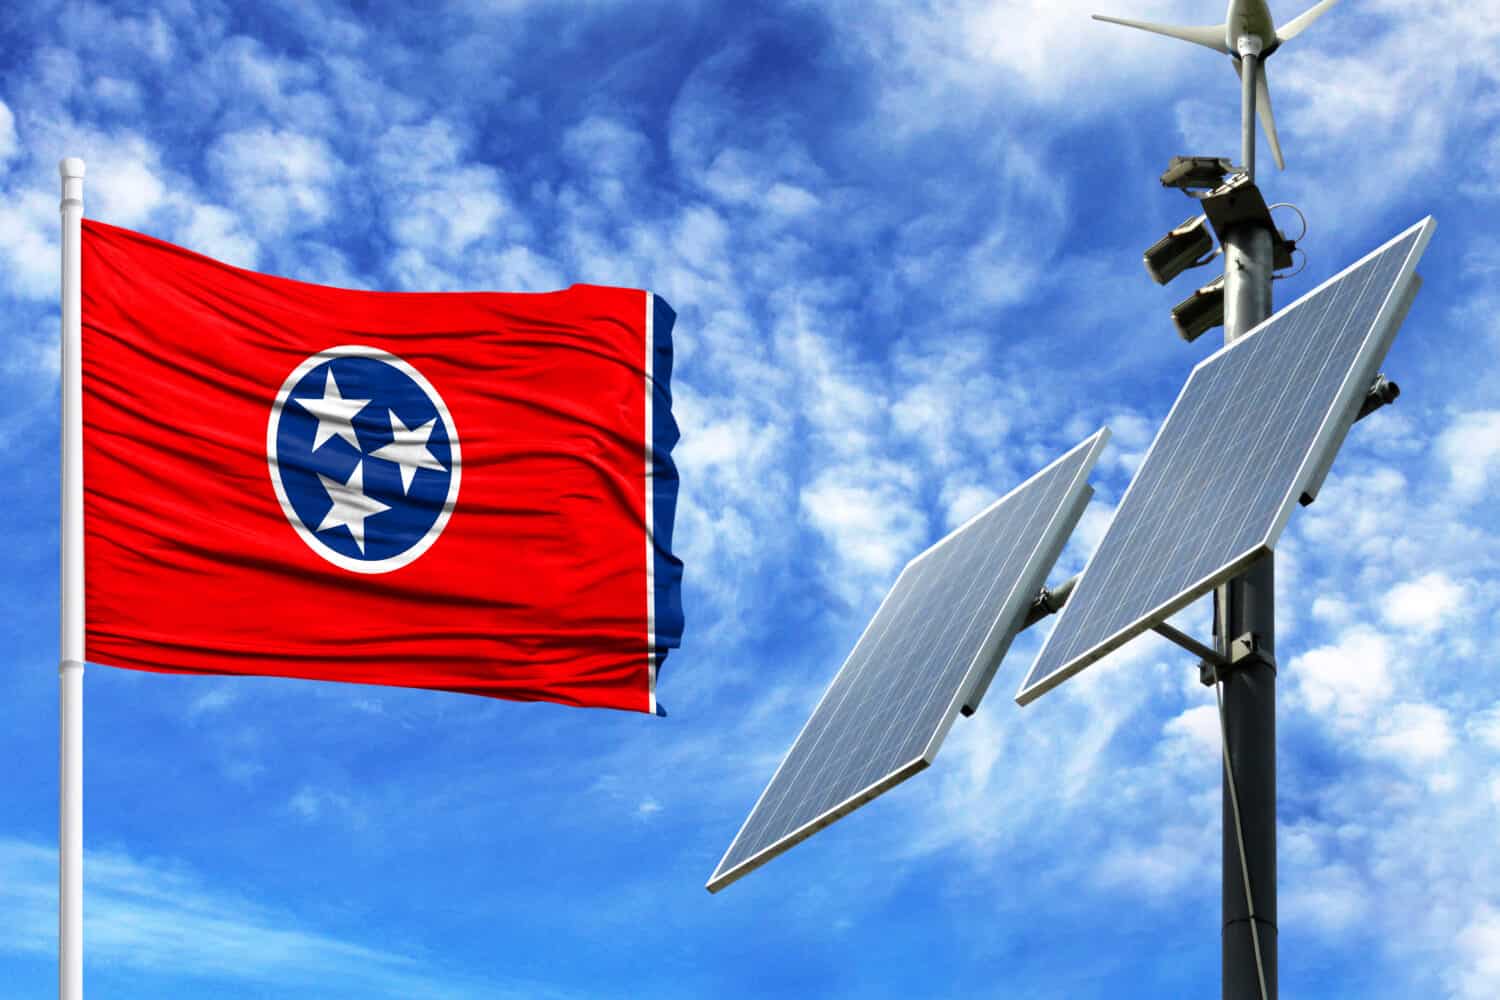 Solar panels on a background of blue sky with a flagpole and the flag State of Tennessee